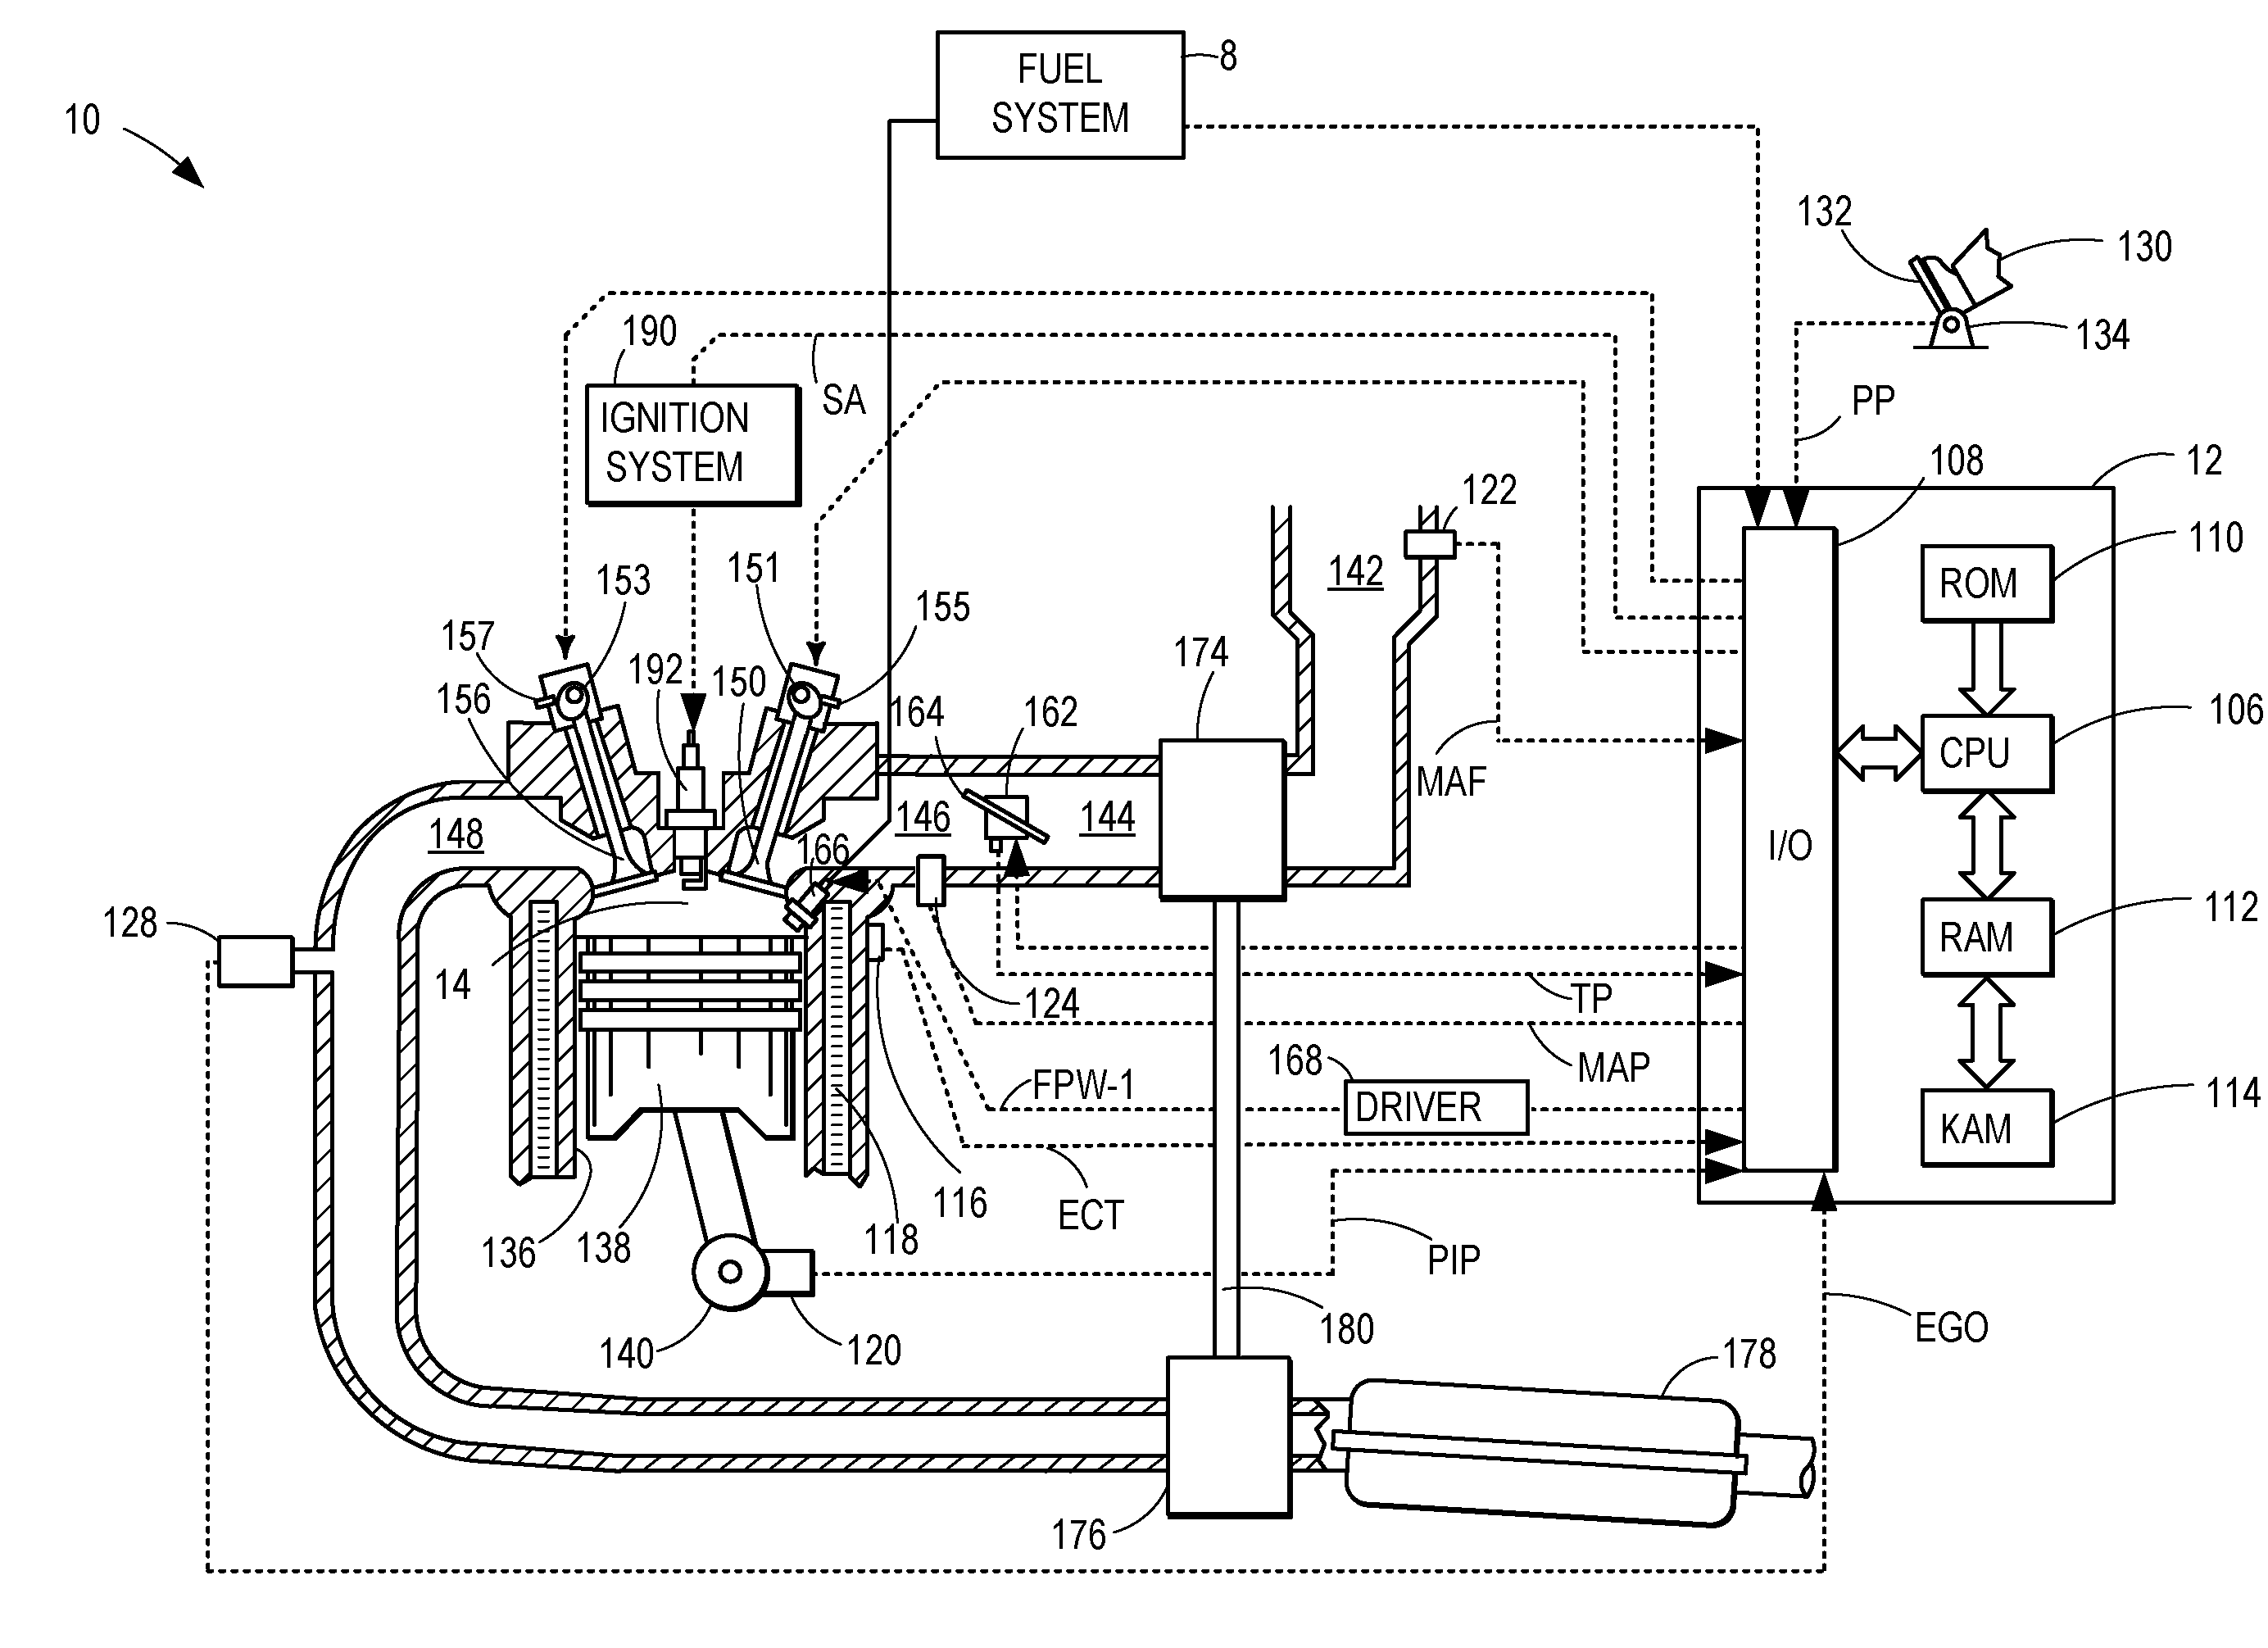 Methods and systems for turbocharger control